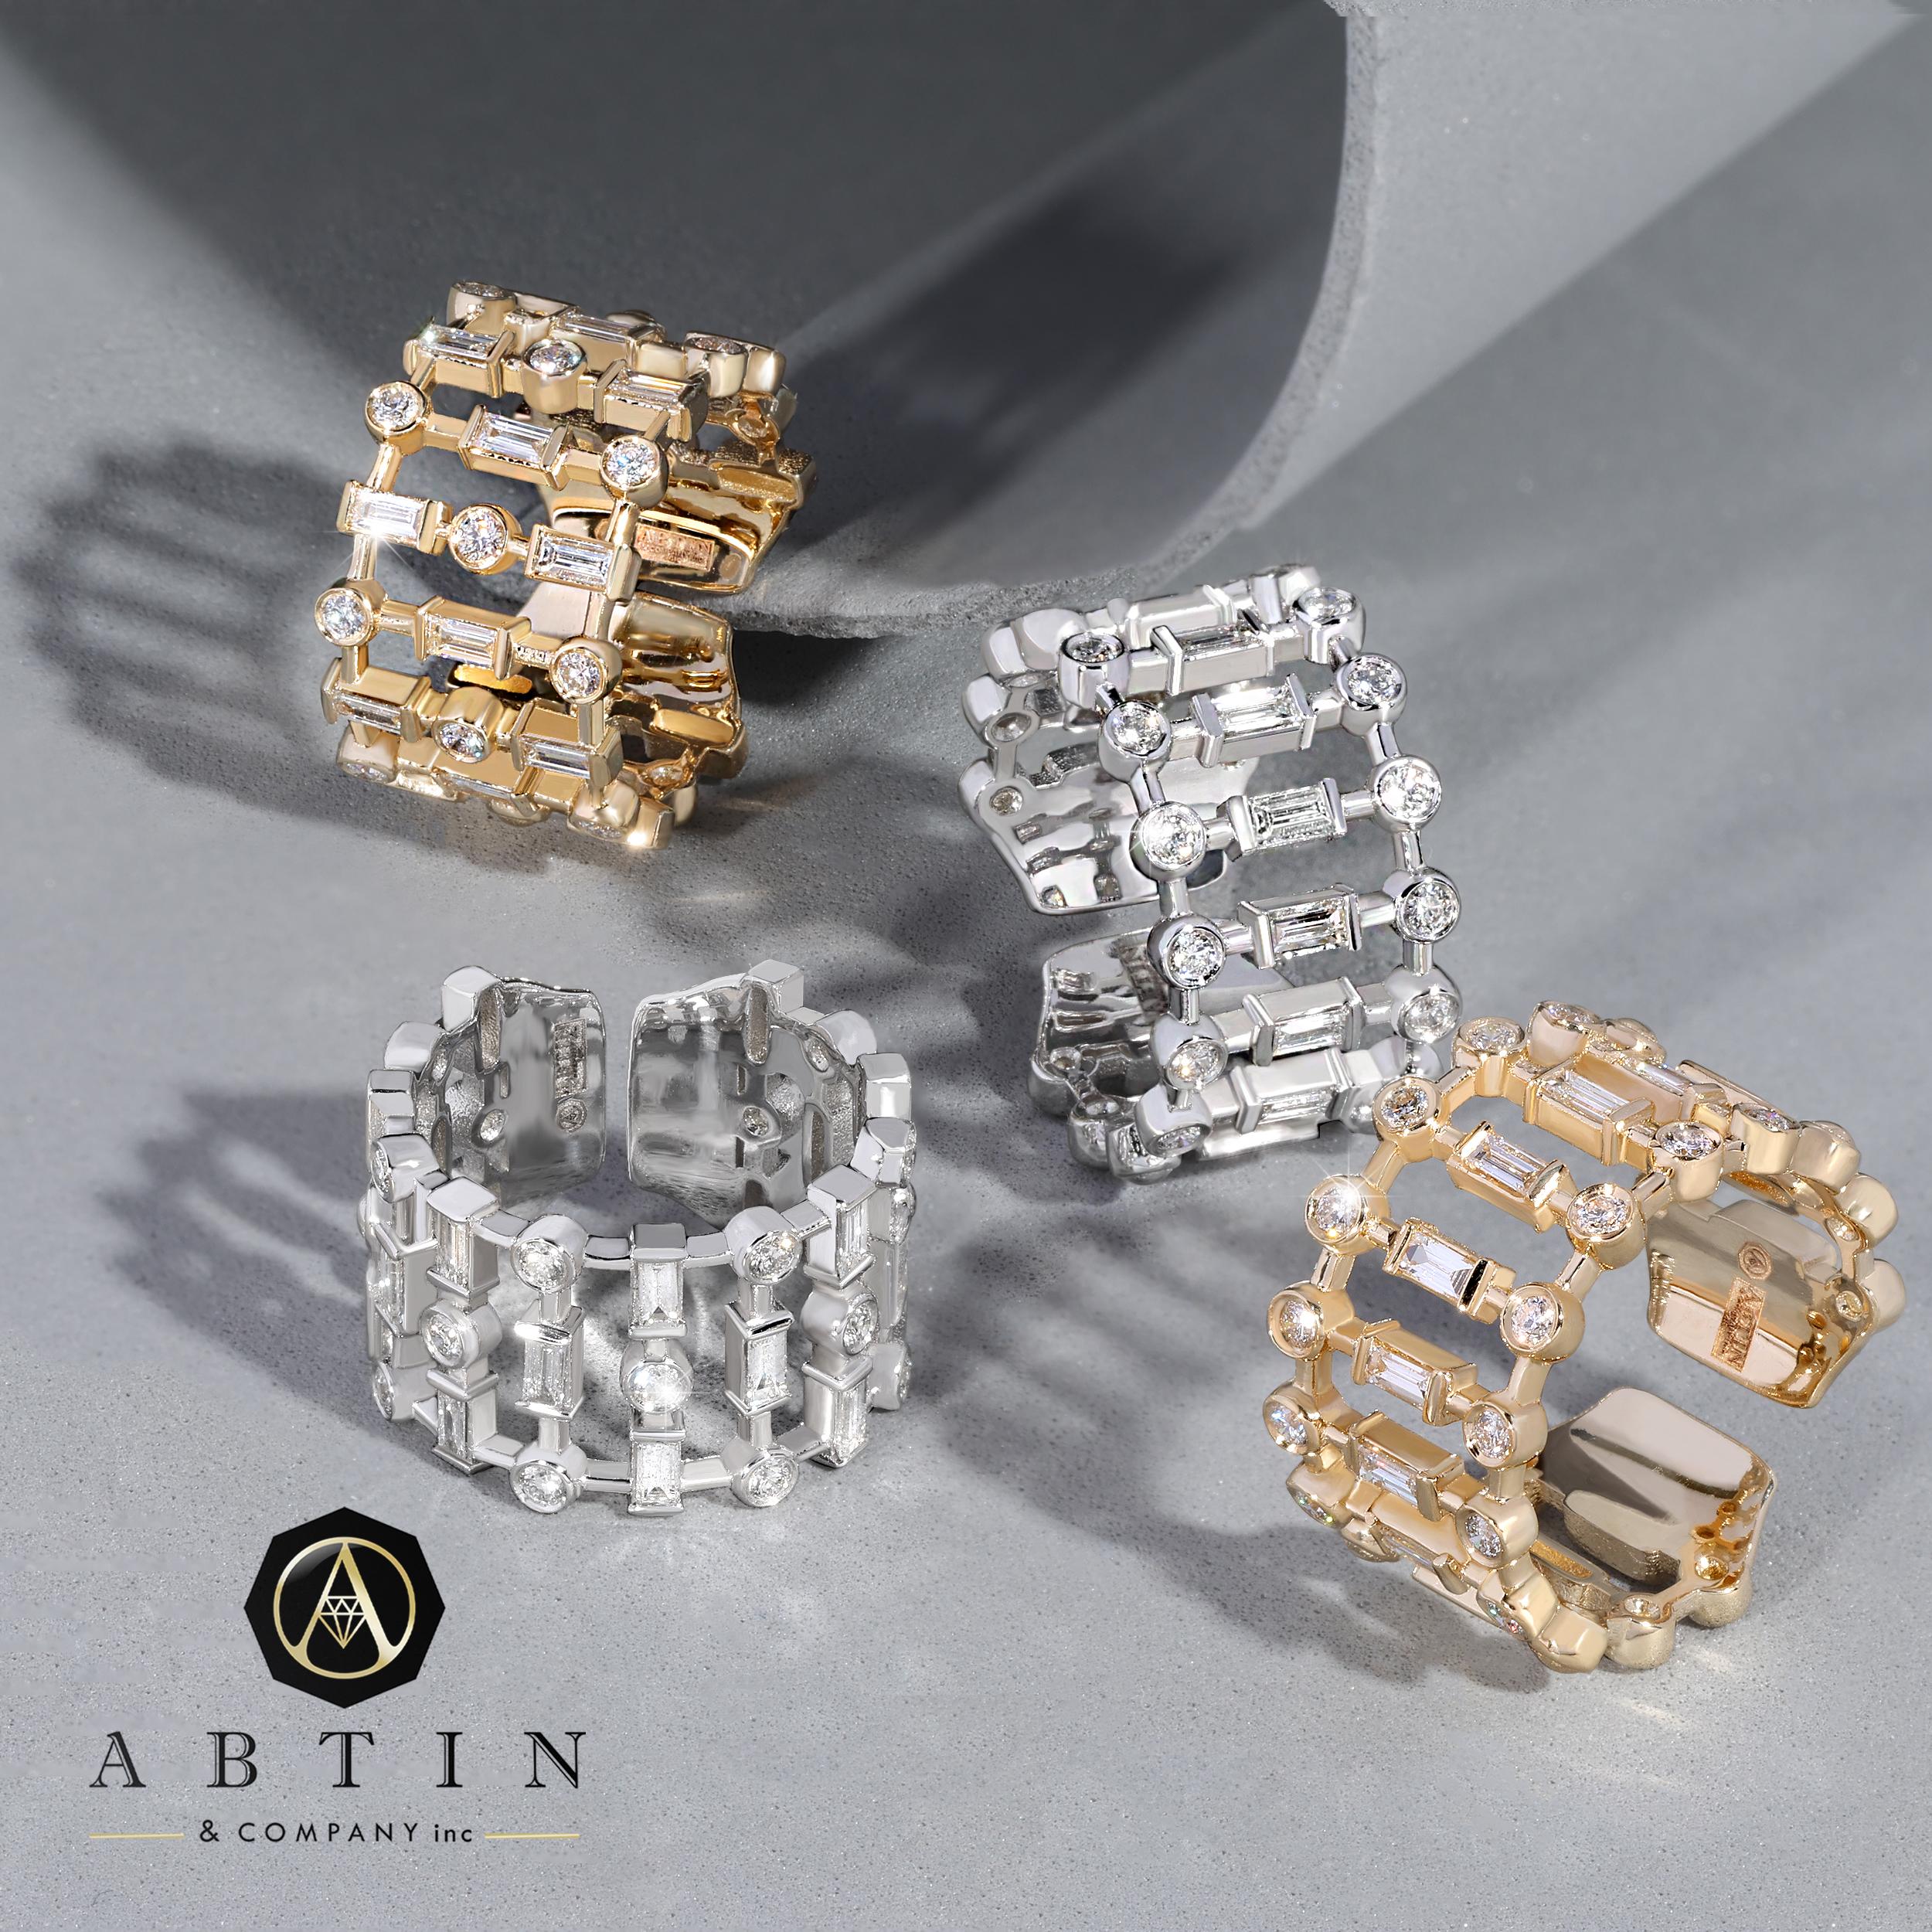 Inspired by the architectural works, this 14K ring is graceful and refined. This statement-making band ring is accented with round & baguette diamonds secured carefully with bezel setting. This one-of-a-kind open ring exudes brilliance and